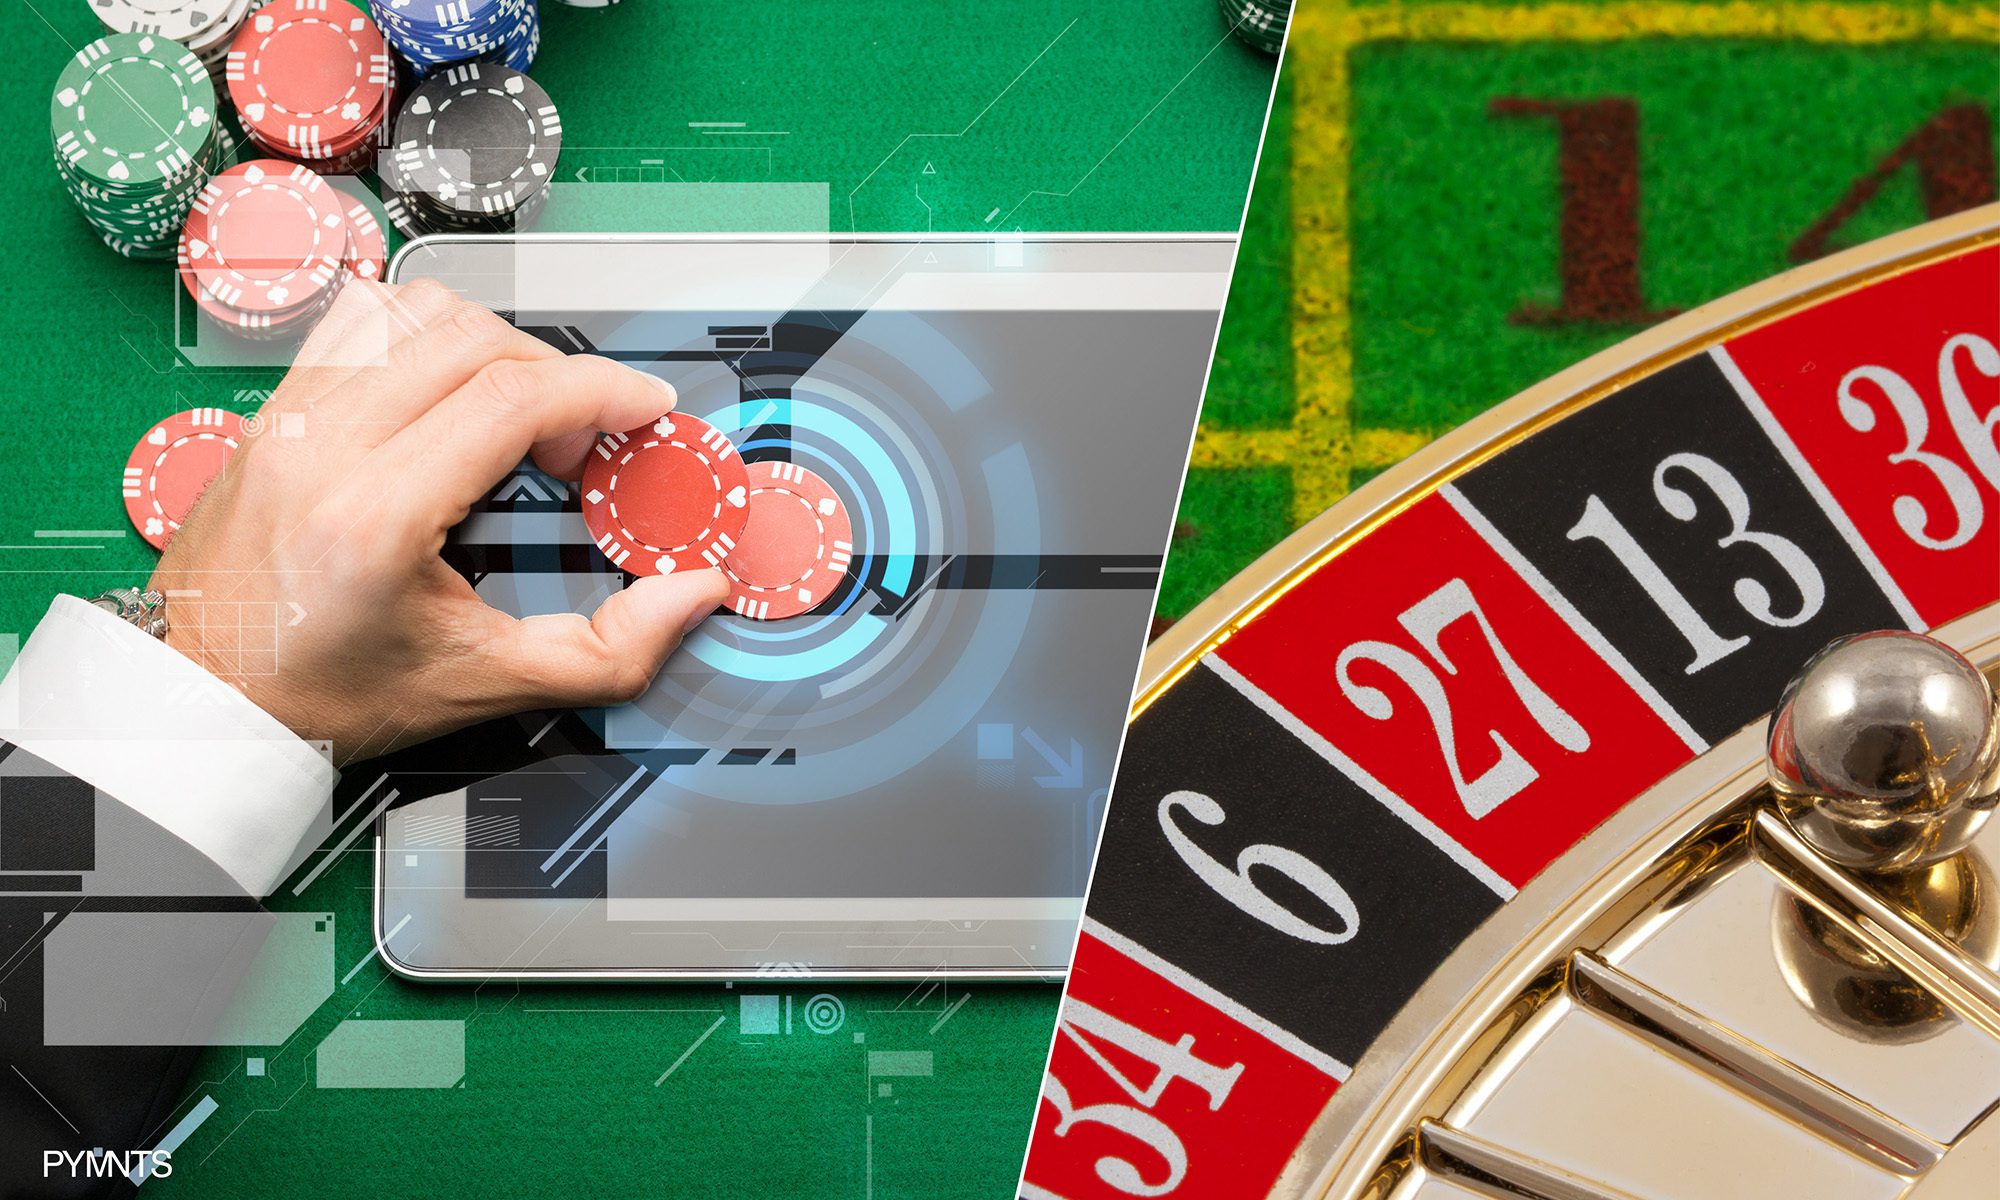 Pragmatic Play bolsters Bet365 partnership with double country expansion -  Casino & games - iGB